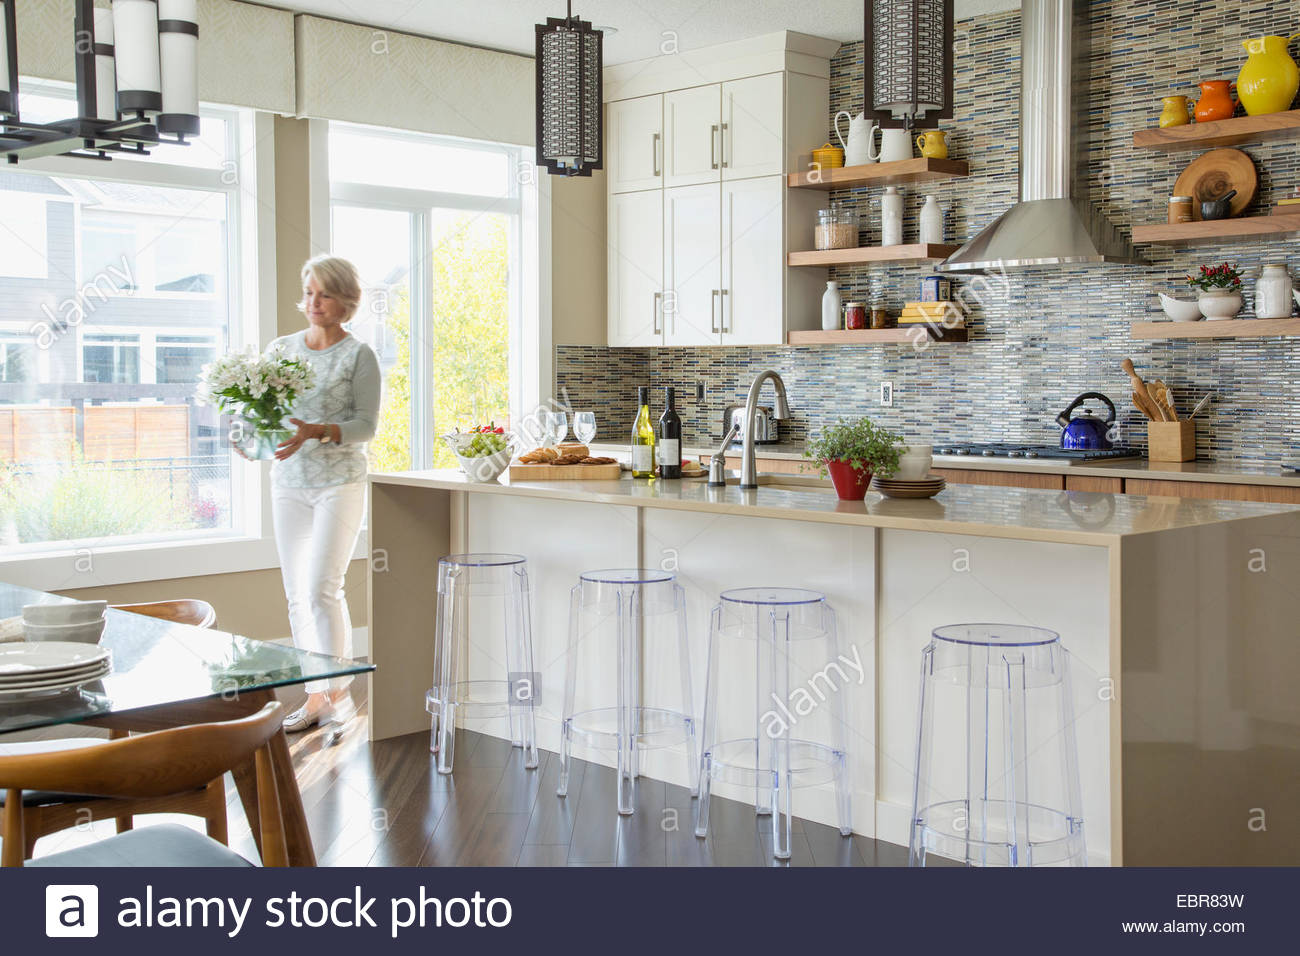 Woman carrying bouquet of flowers in kitchen Stock Photo